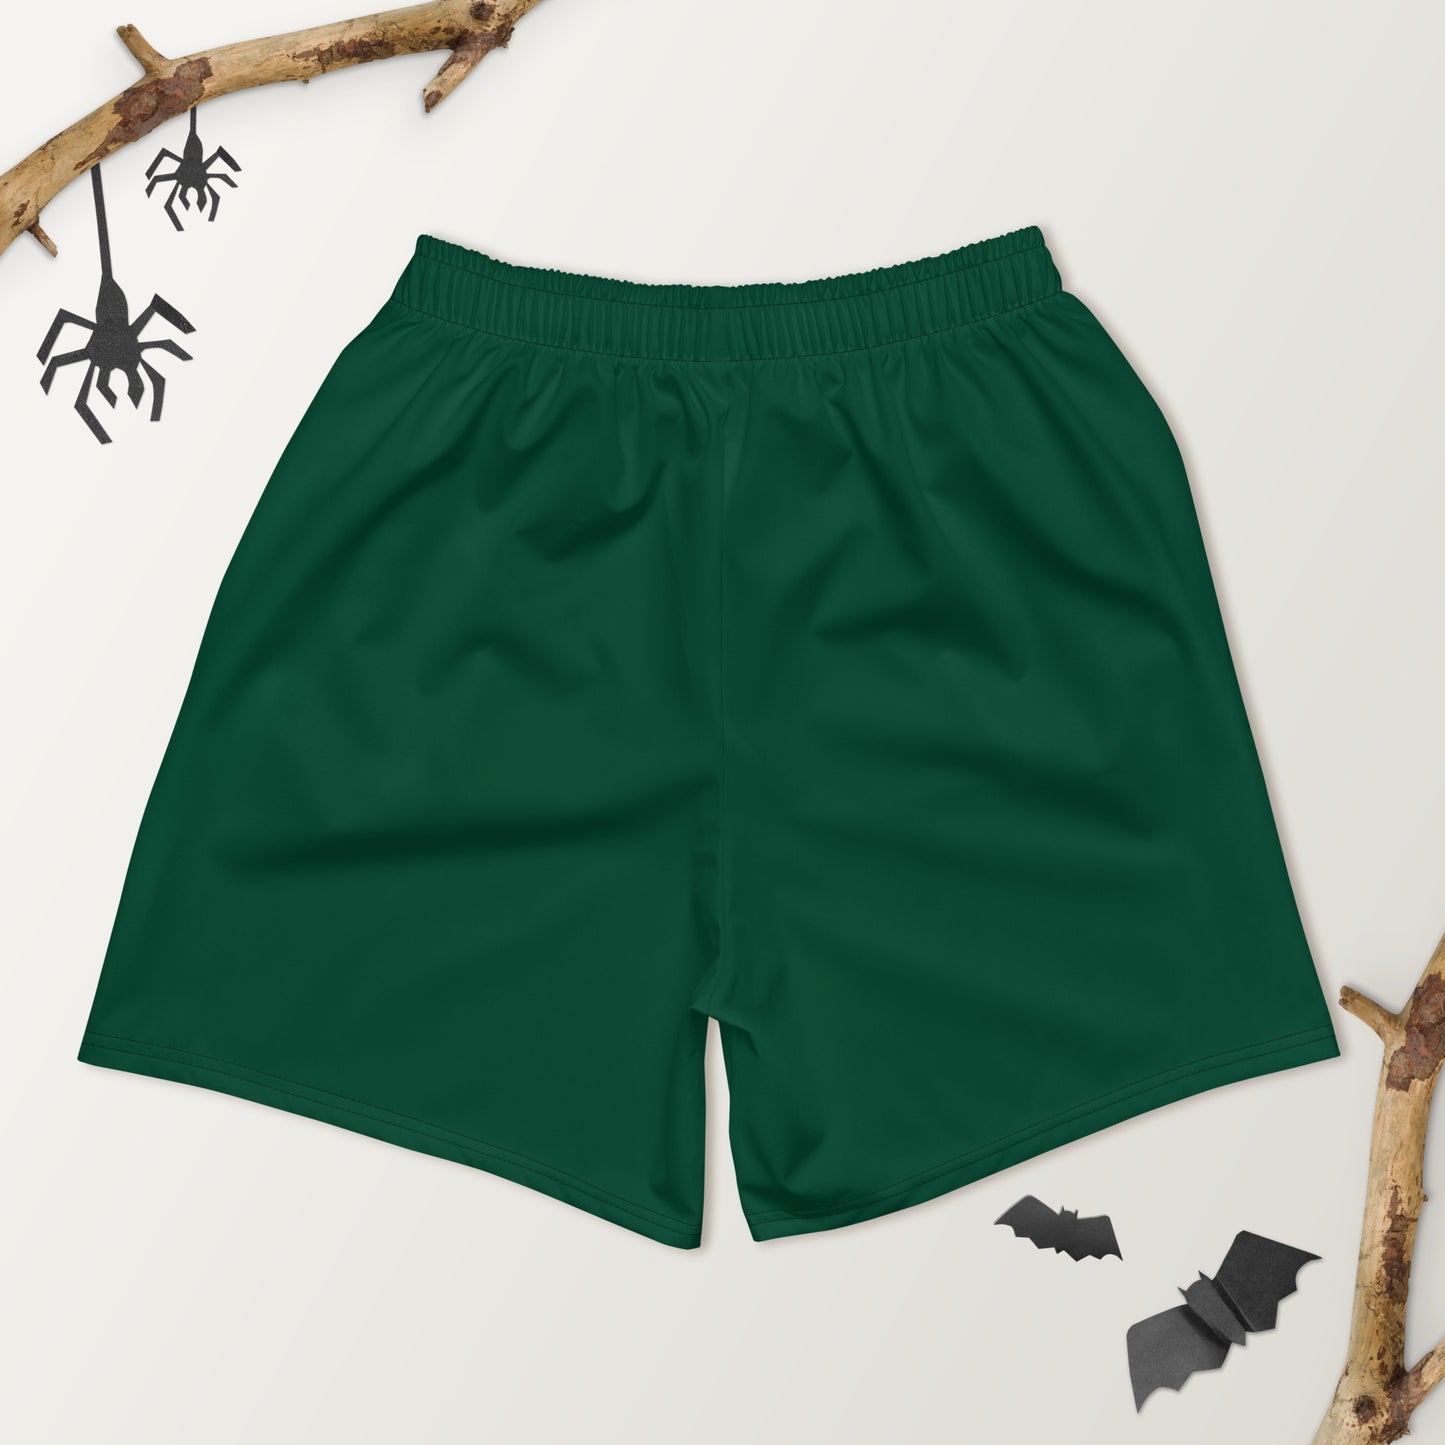 Same Goals Different Struggles British Racing Green Men's Recycled Athletic Shorts